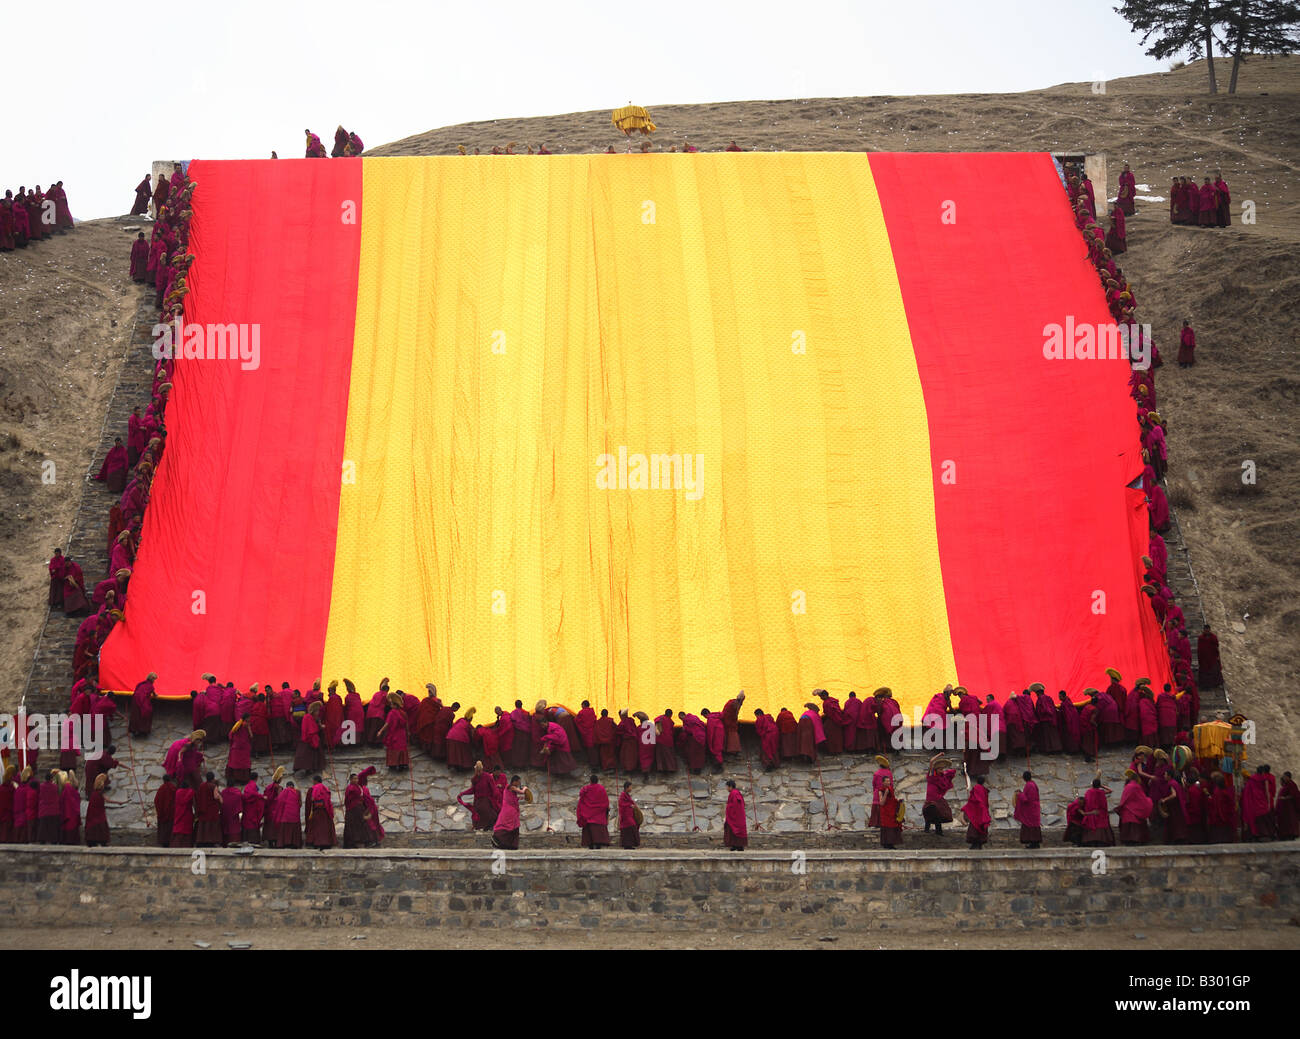 Thanka opening ceremony during a Buddhist festival in Lower Wutong,Tongren,Sichuan Province,China Stock Photo